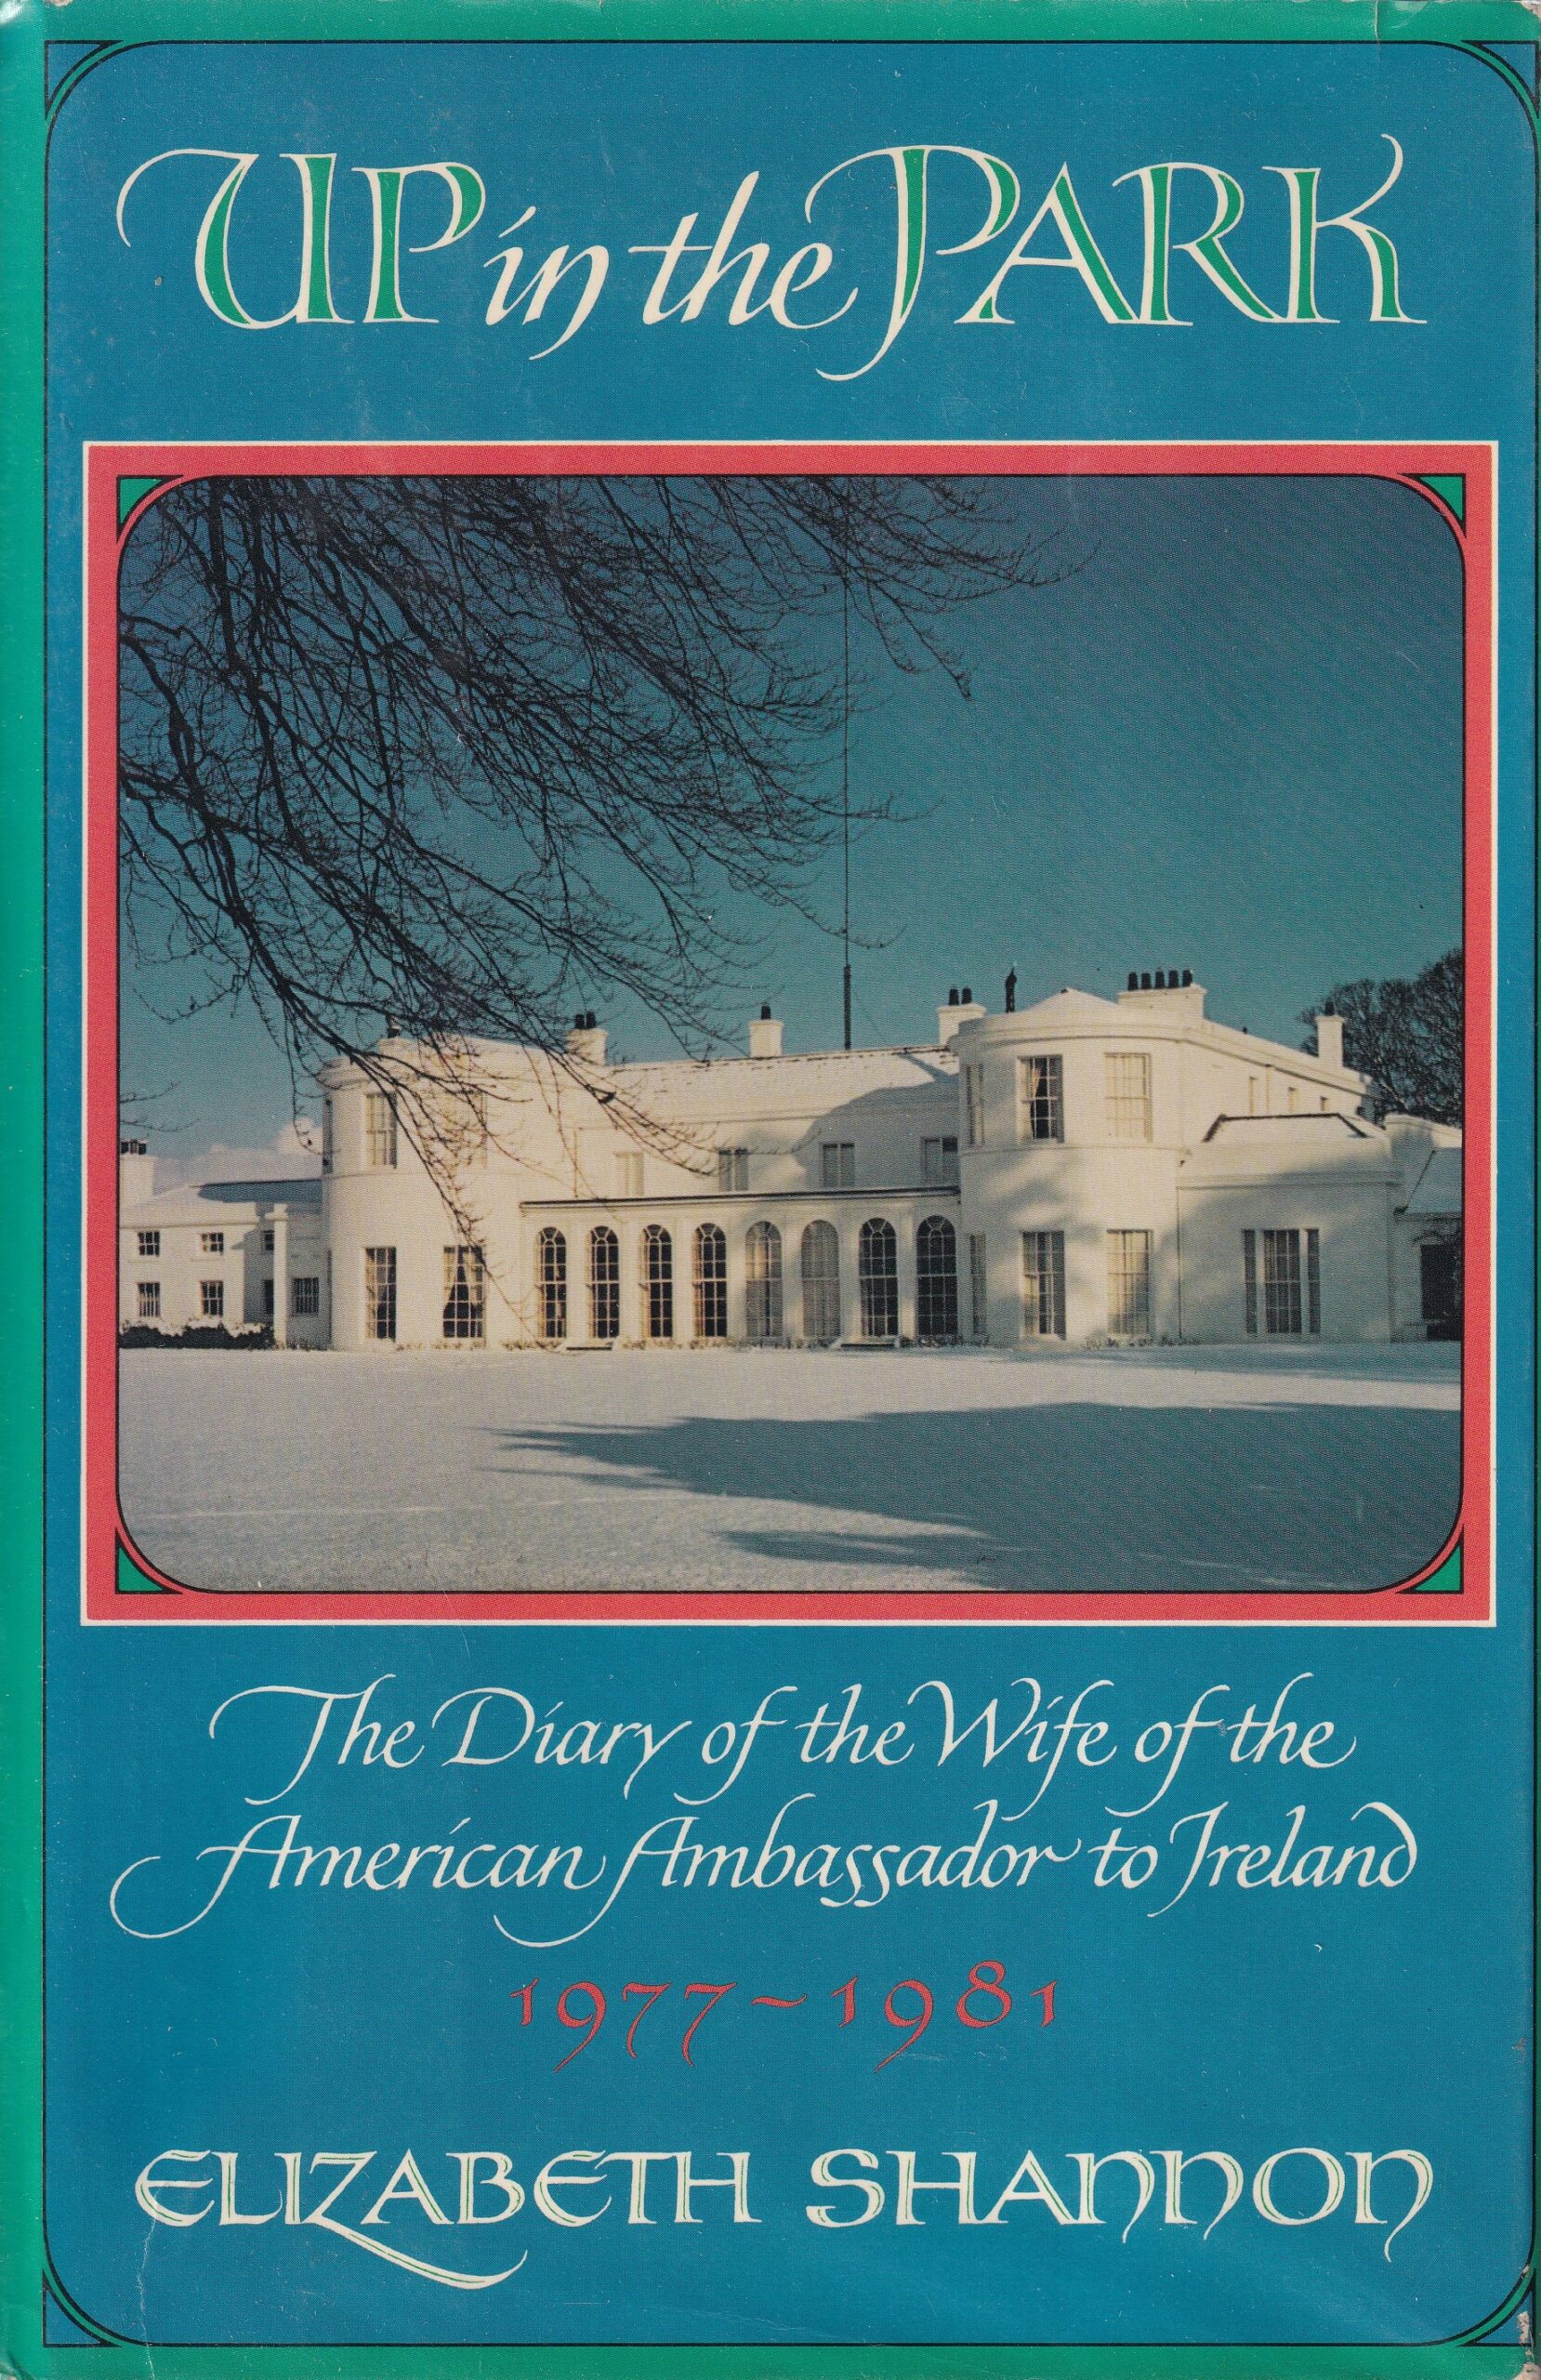 Up in the Park: The Diary of the Wife of the American Ambassador to Ireland 1977-1981 by Elizabeth Shannon